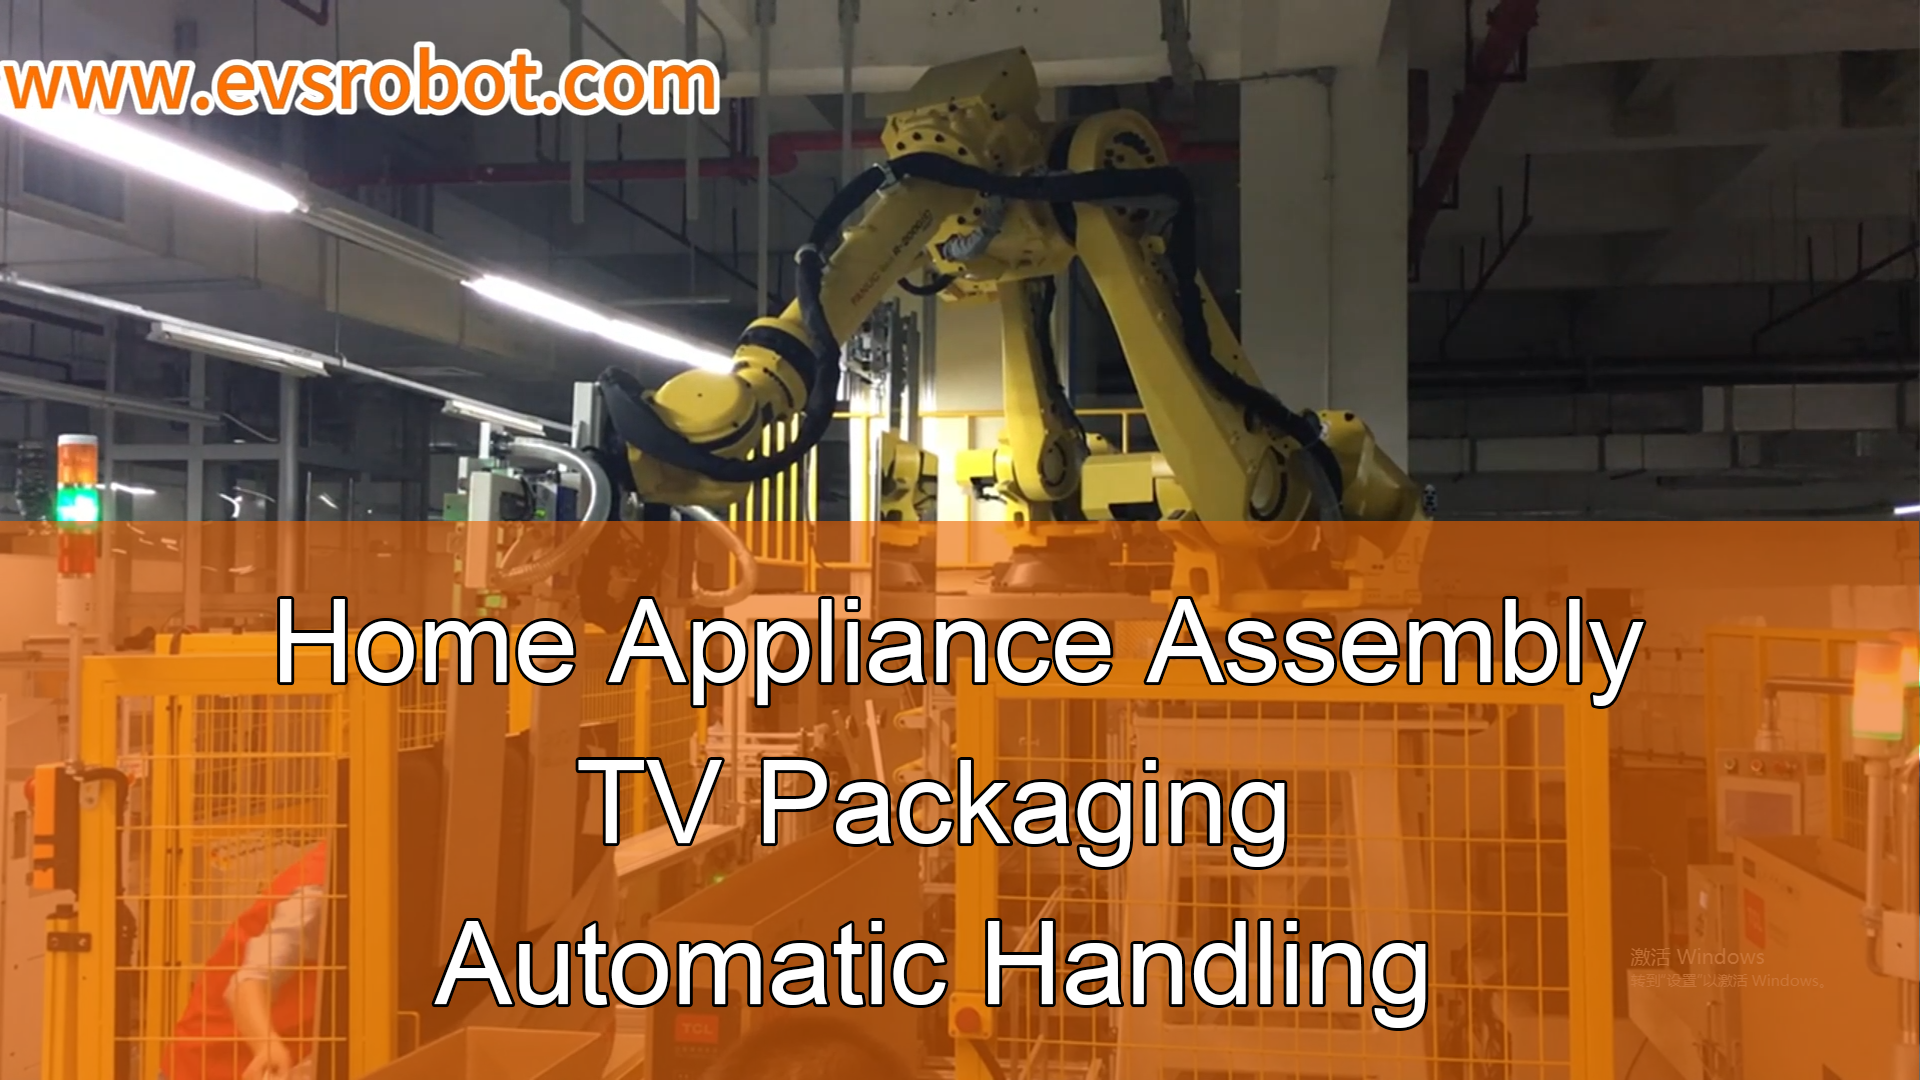 Home Appliance Assembly | TV Packaging | Automatic Handling